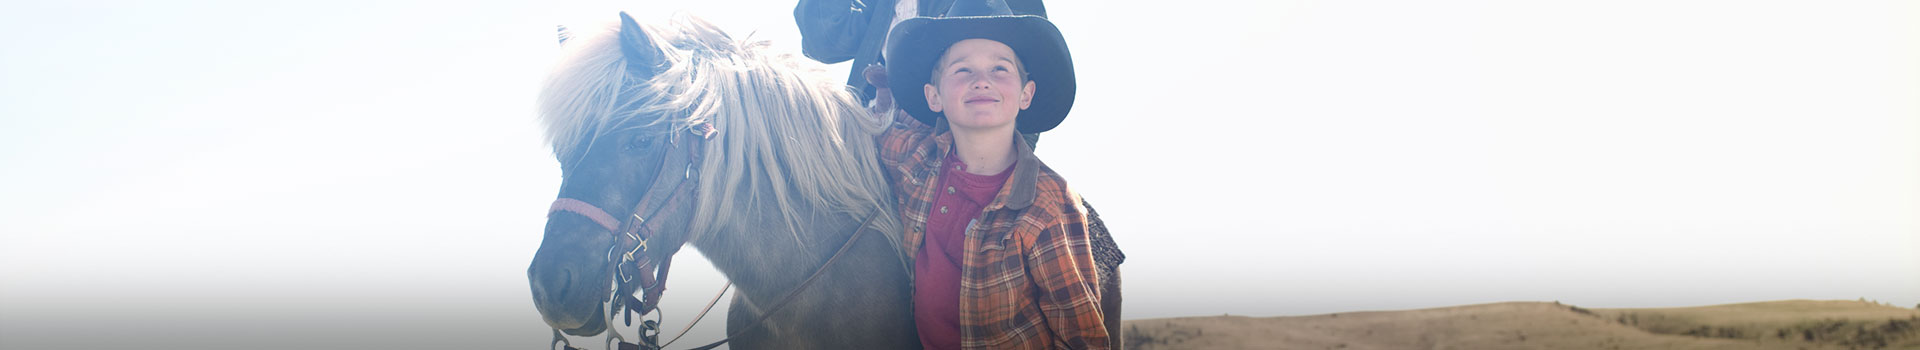 young boy in cowboy hat standing by pony